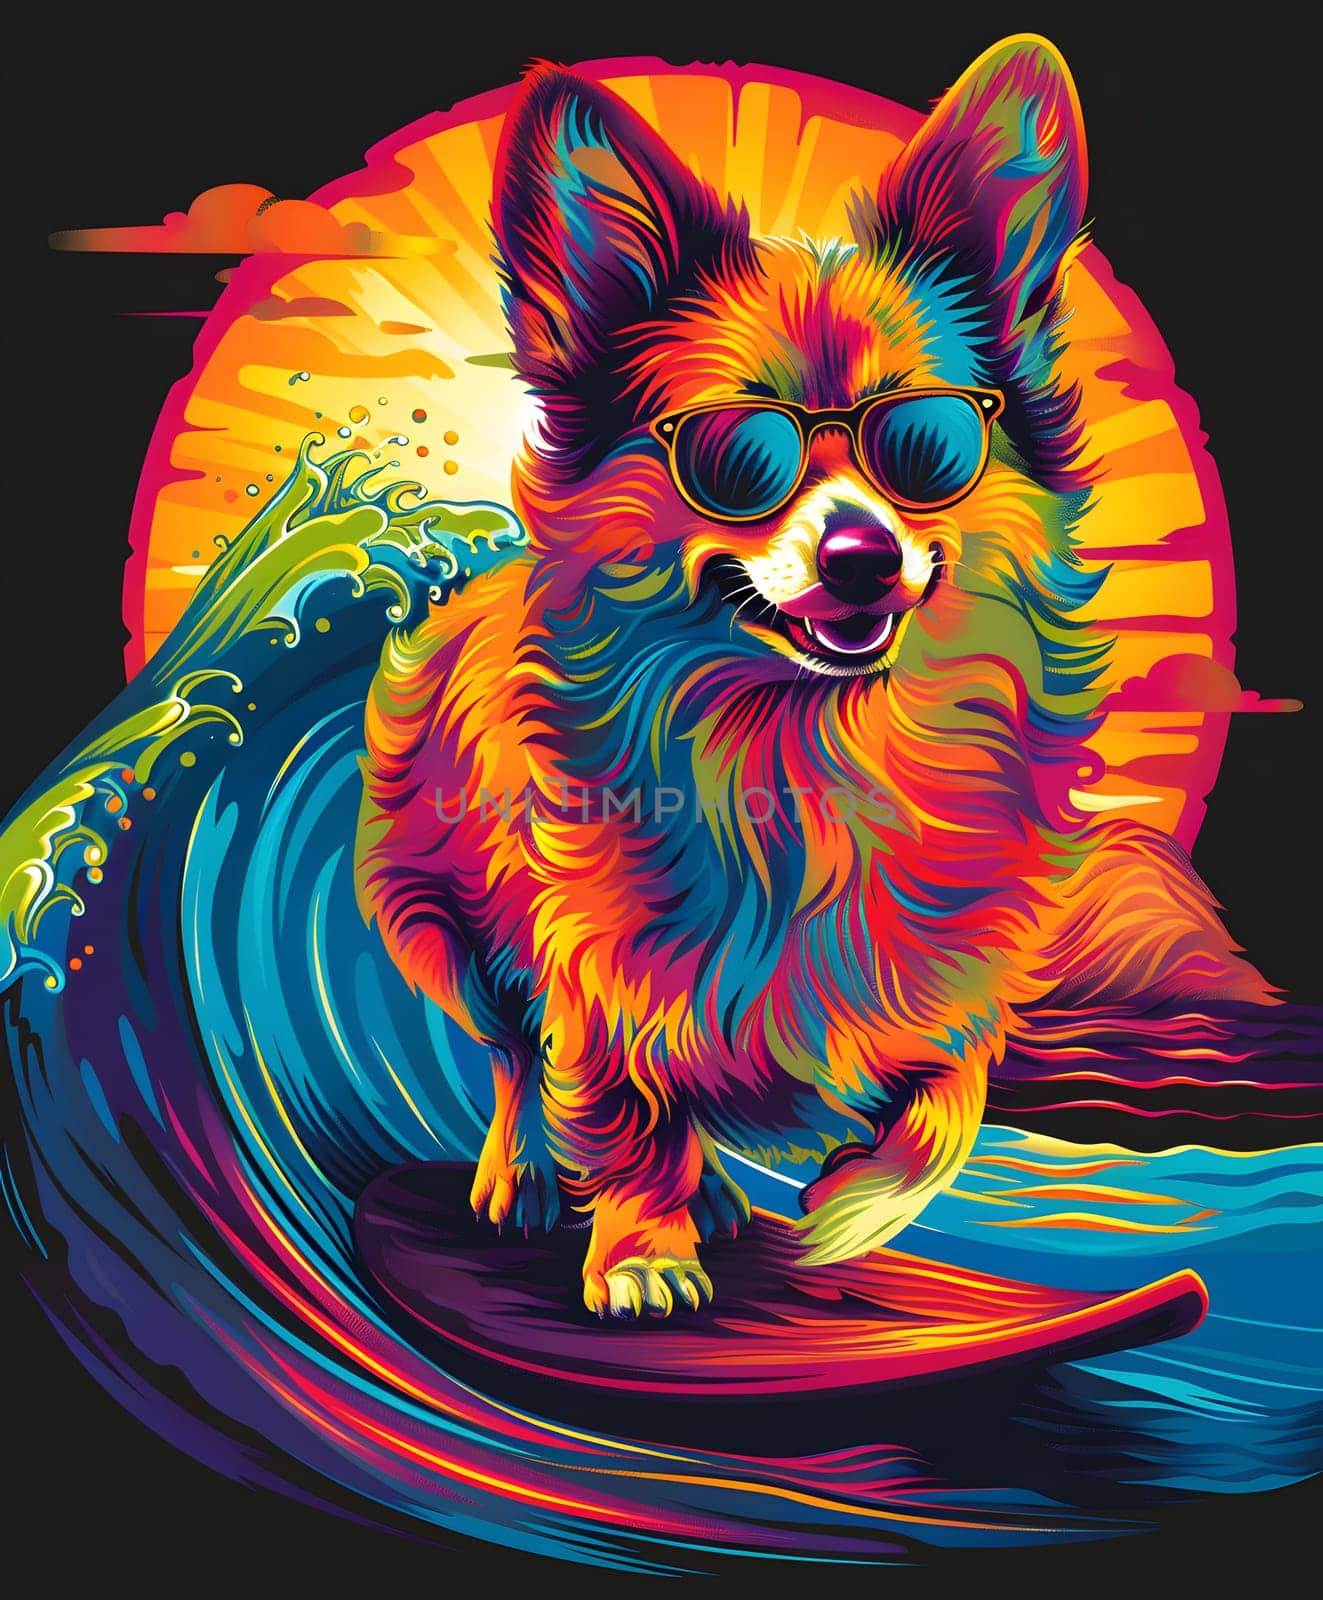 A fawncolored carnivore canine, sporting whiskers and an electric blue and magenta surfboard, rides the waves with style and flair, showcasing the true essence of a companion dog